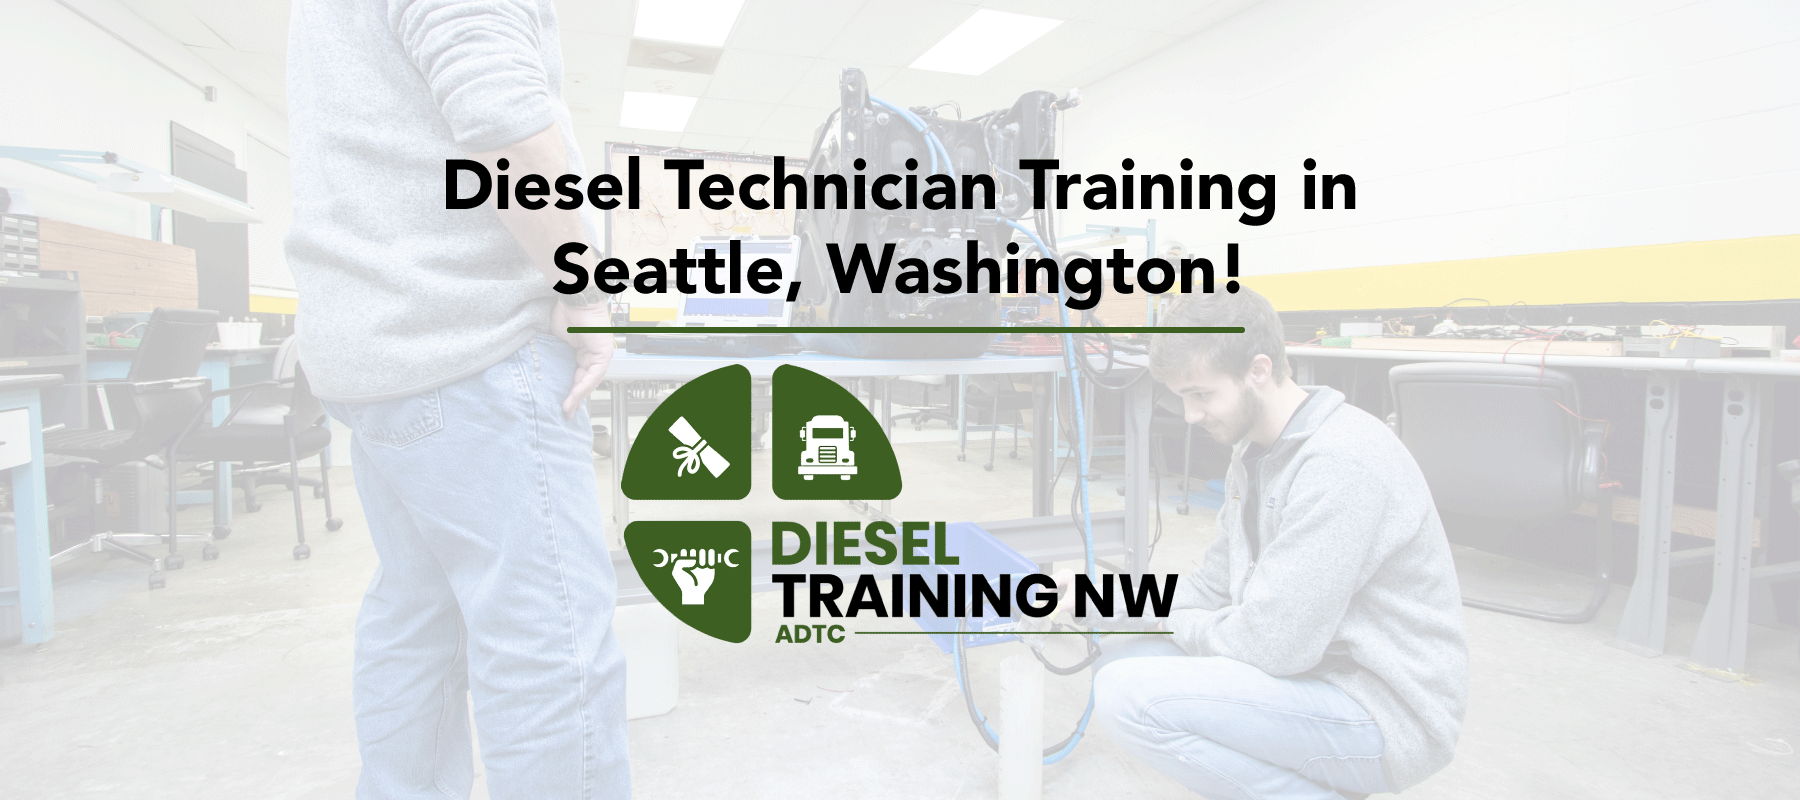 Diesel Technician Training is Coming to Seattle!